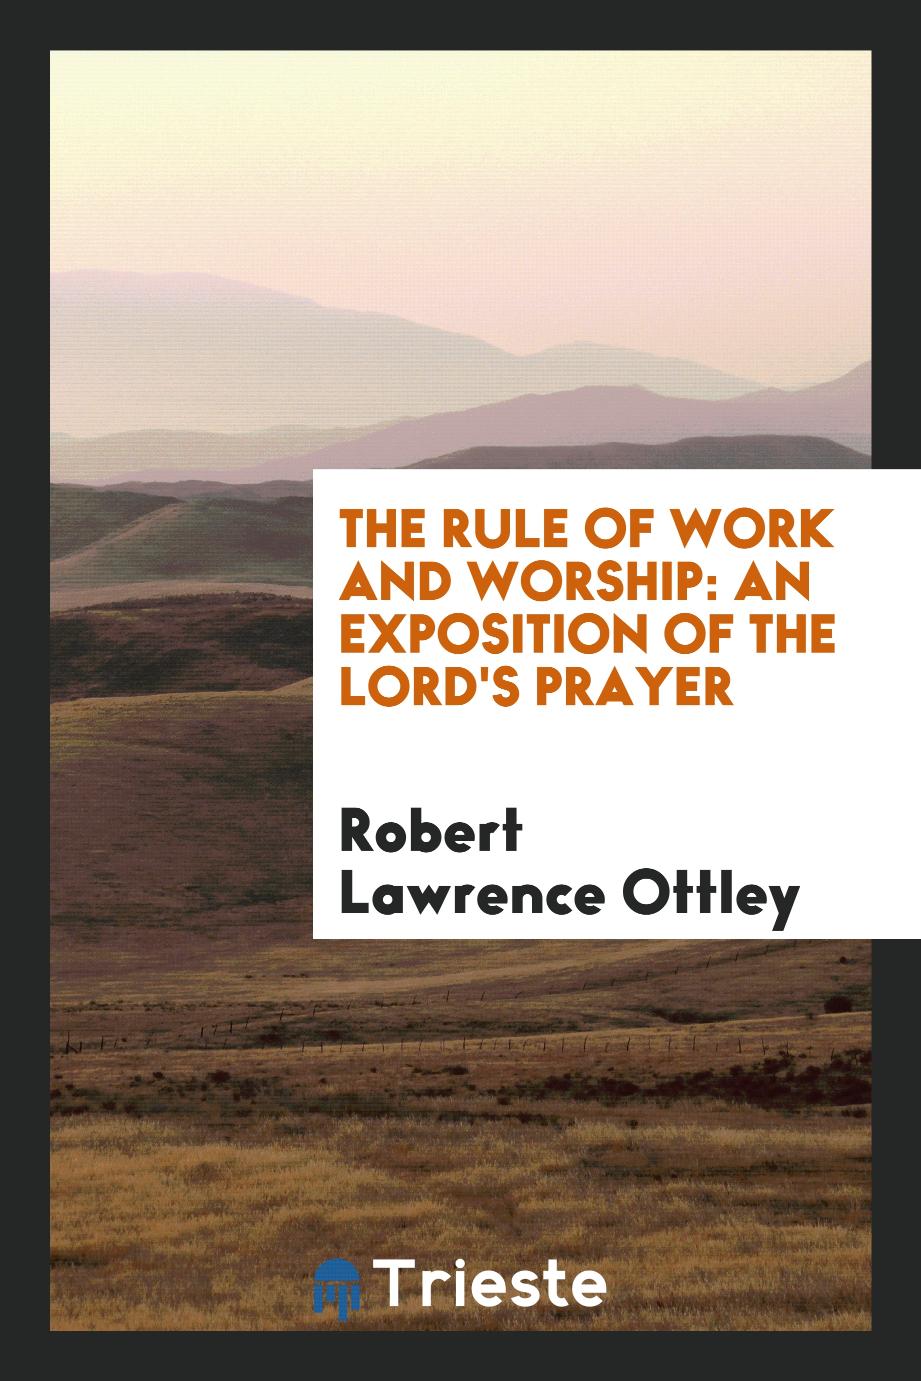 The rule of work and worship: an exposition of the Lord's prayer